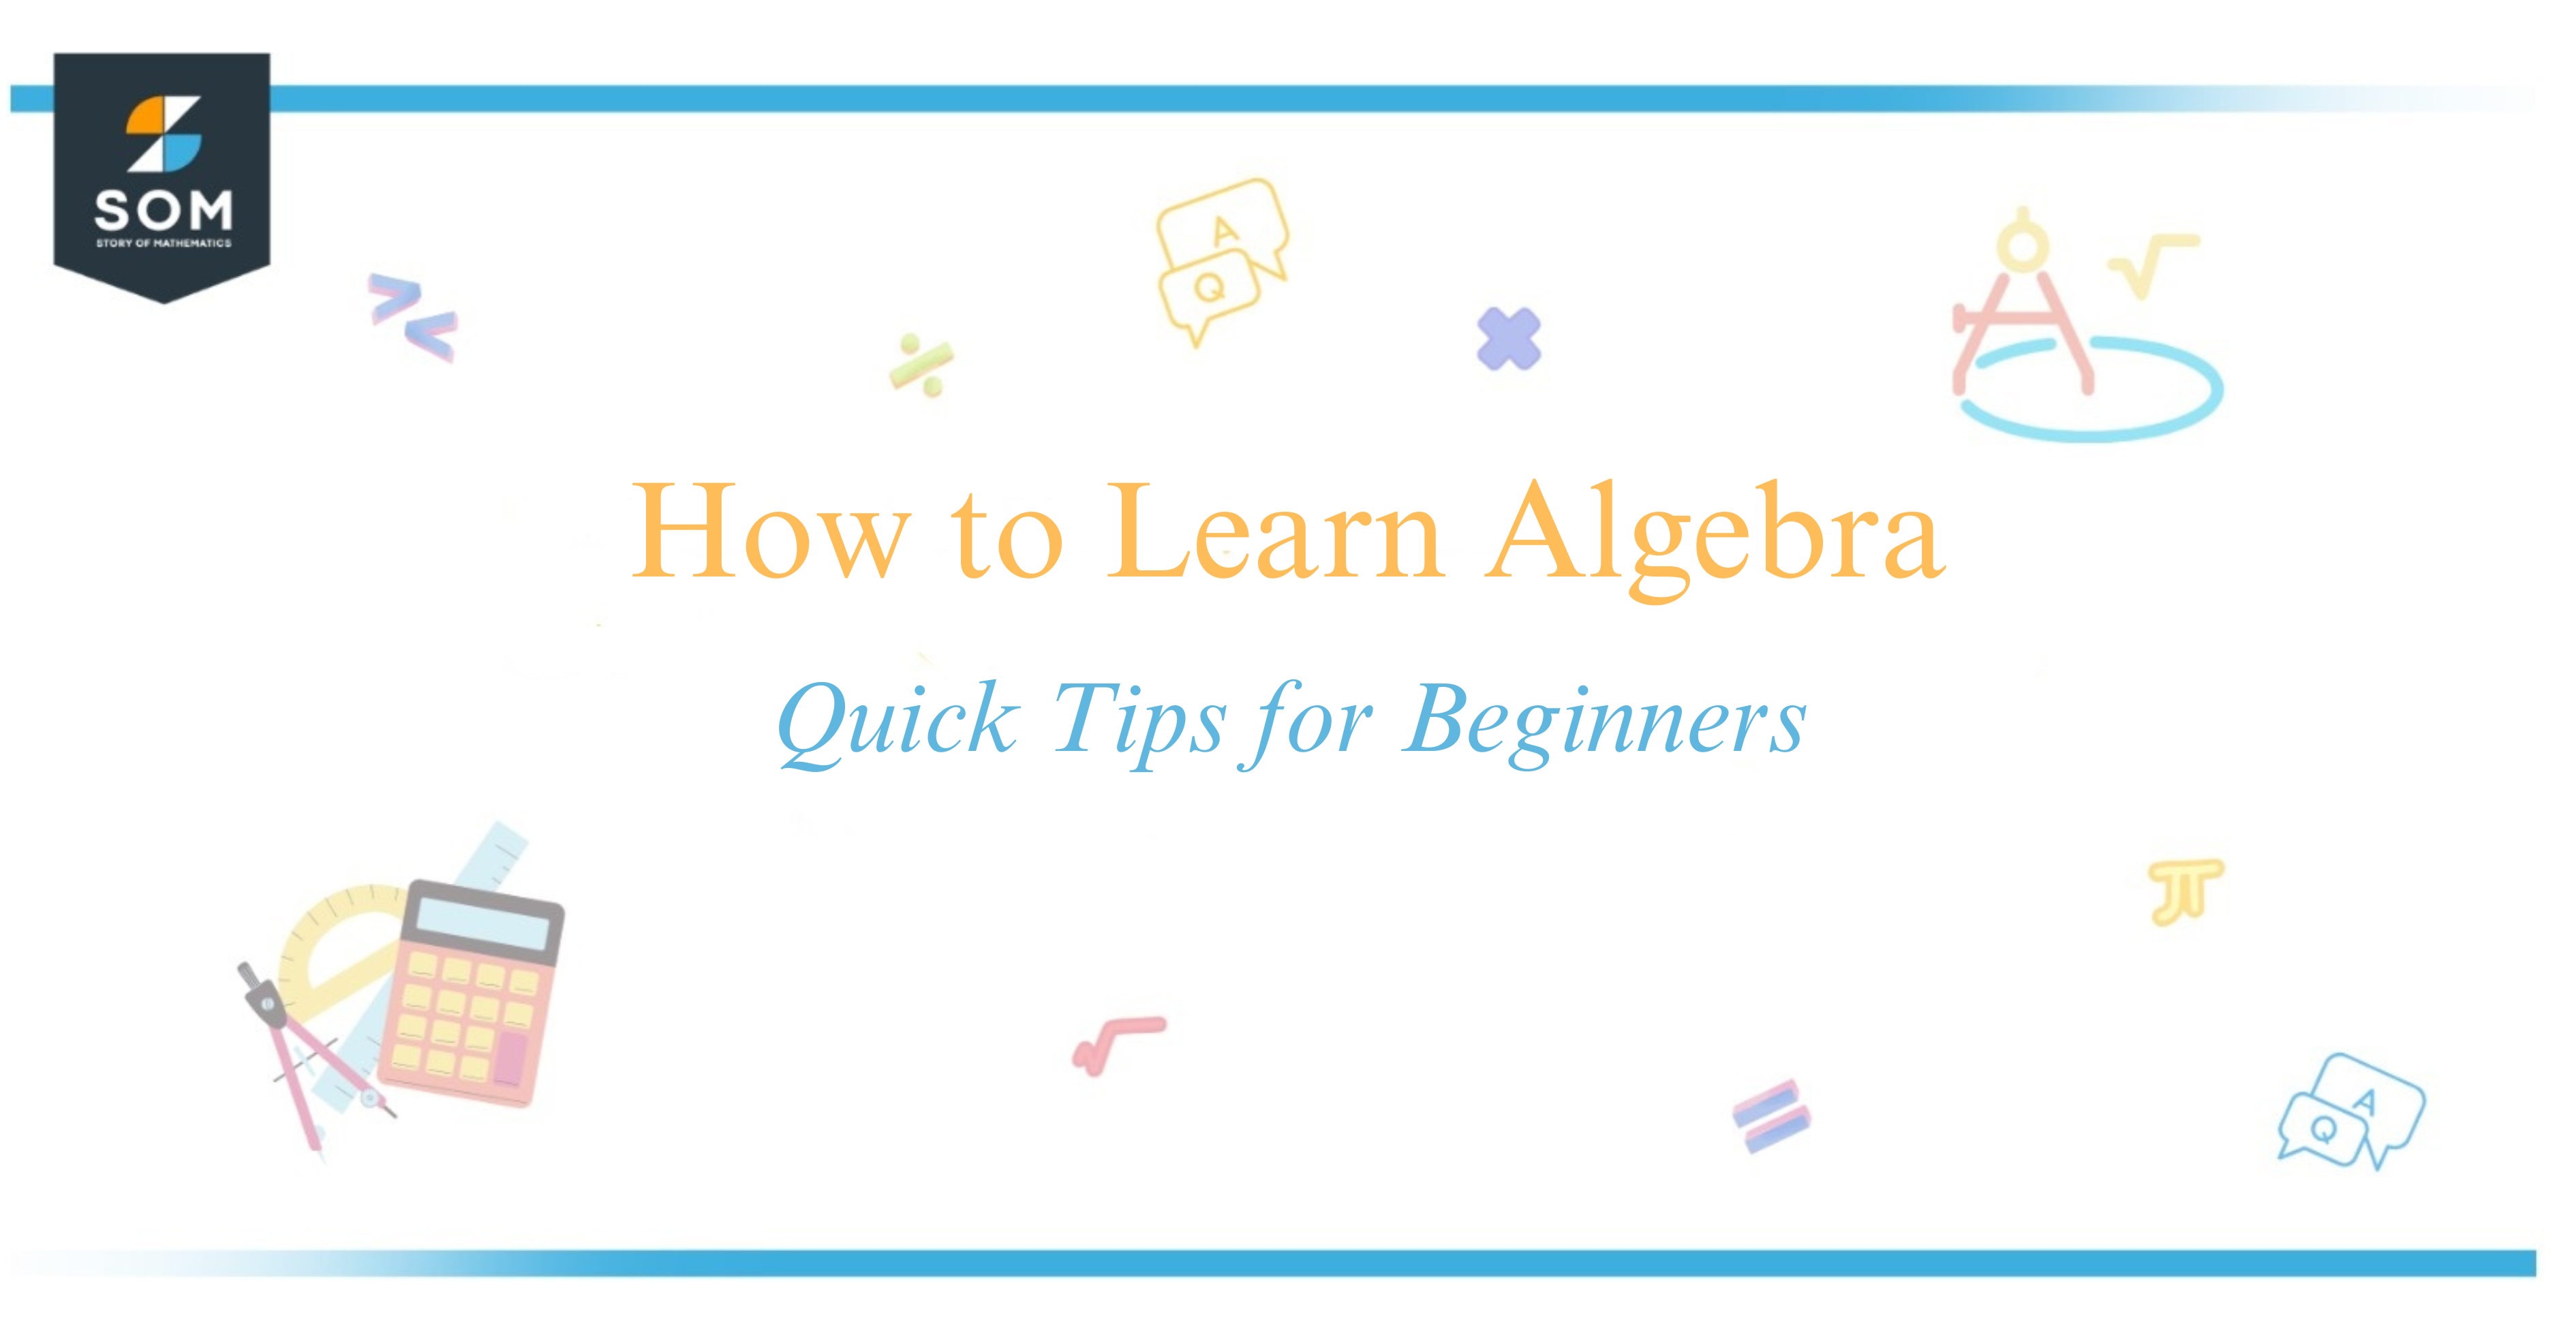 How to Learn Algebra Quick Tips for Beginners